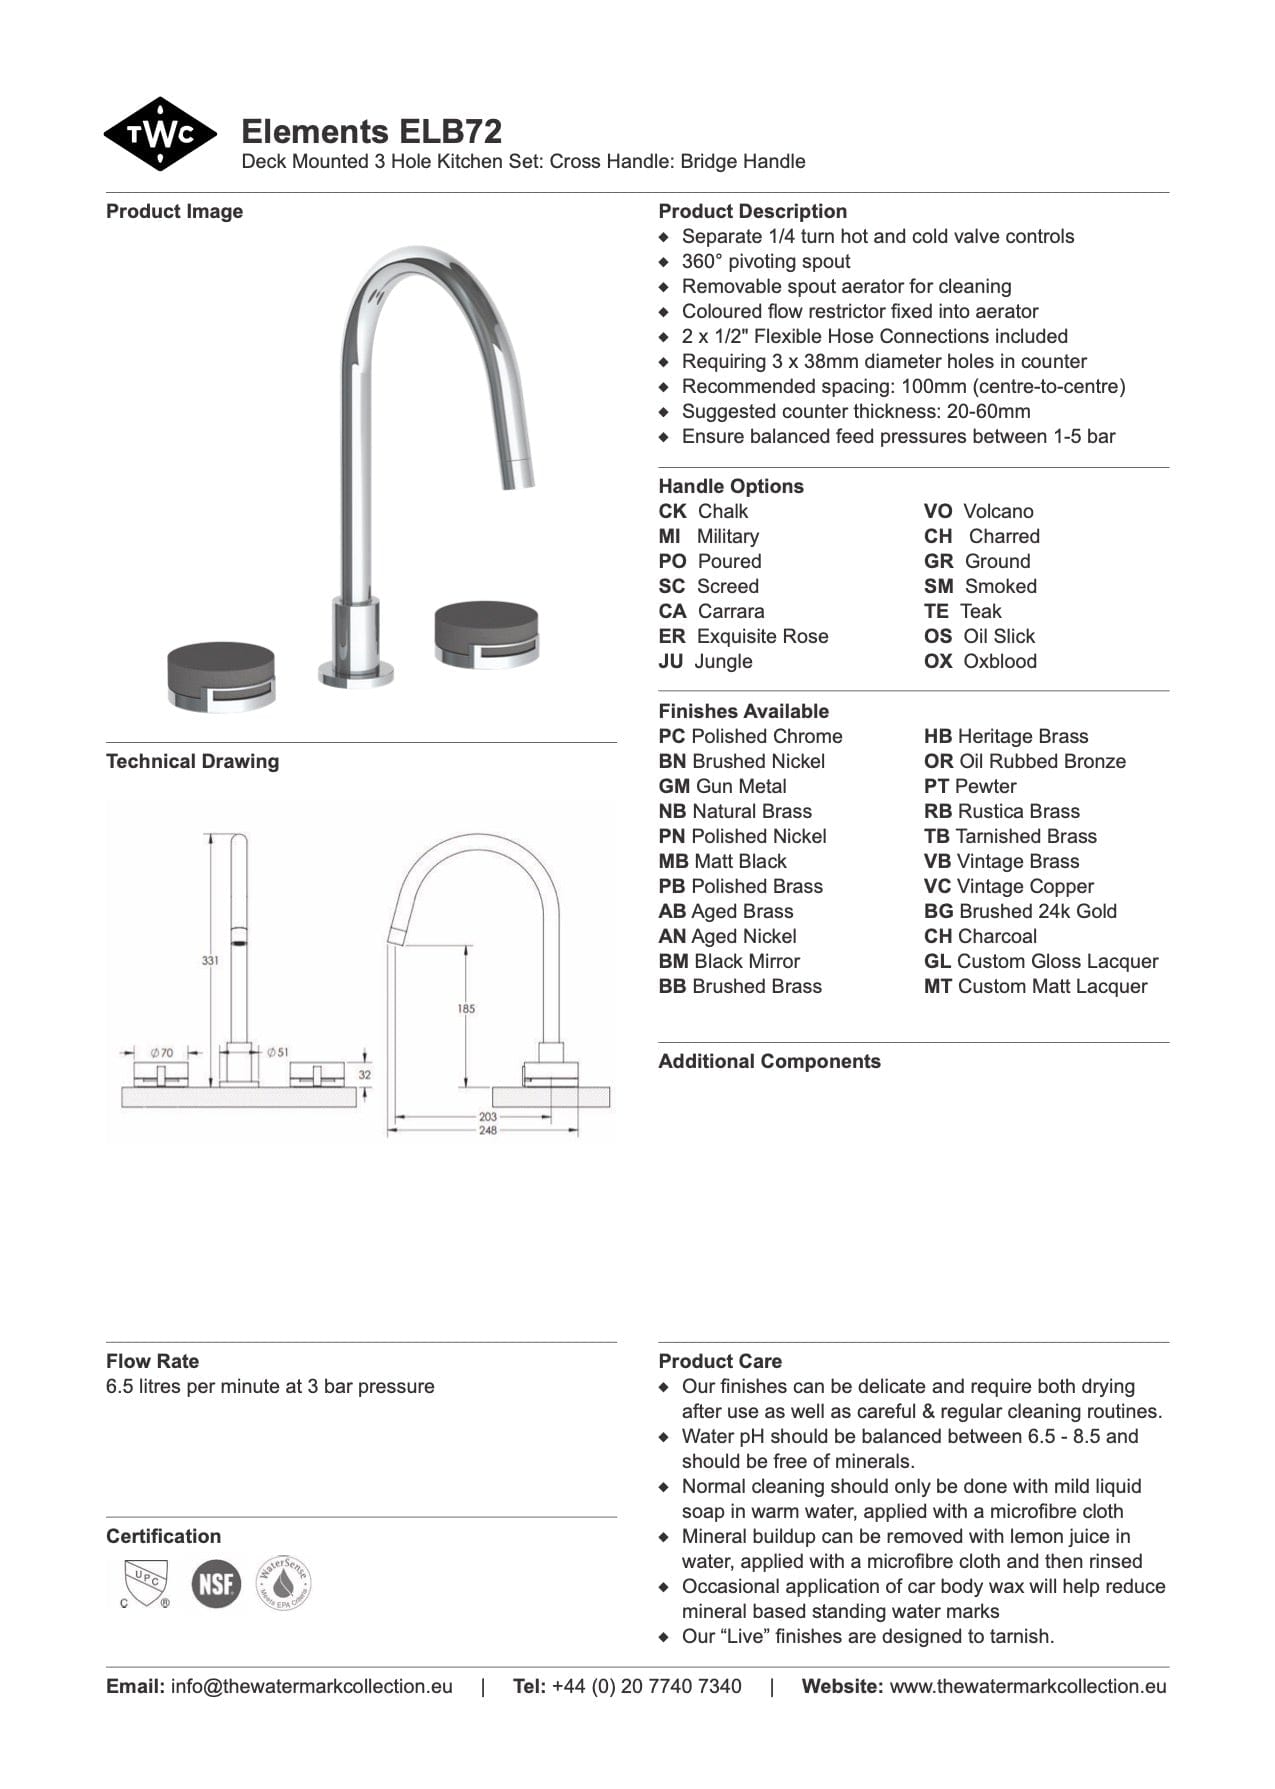 The Watermark Collection Kitchen Tap The Watermark Collection Elements 3 Hole Kitchen Set | Bridge Insert